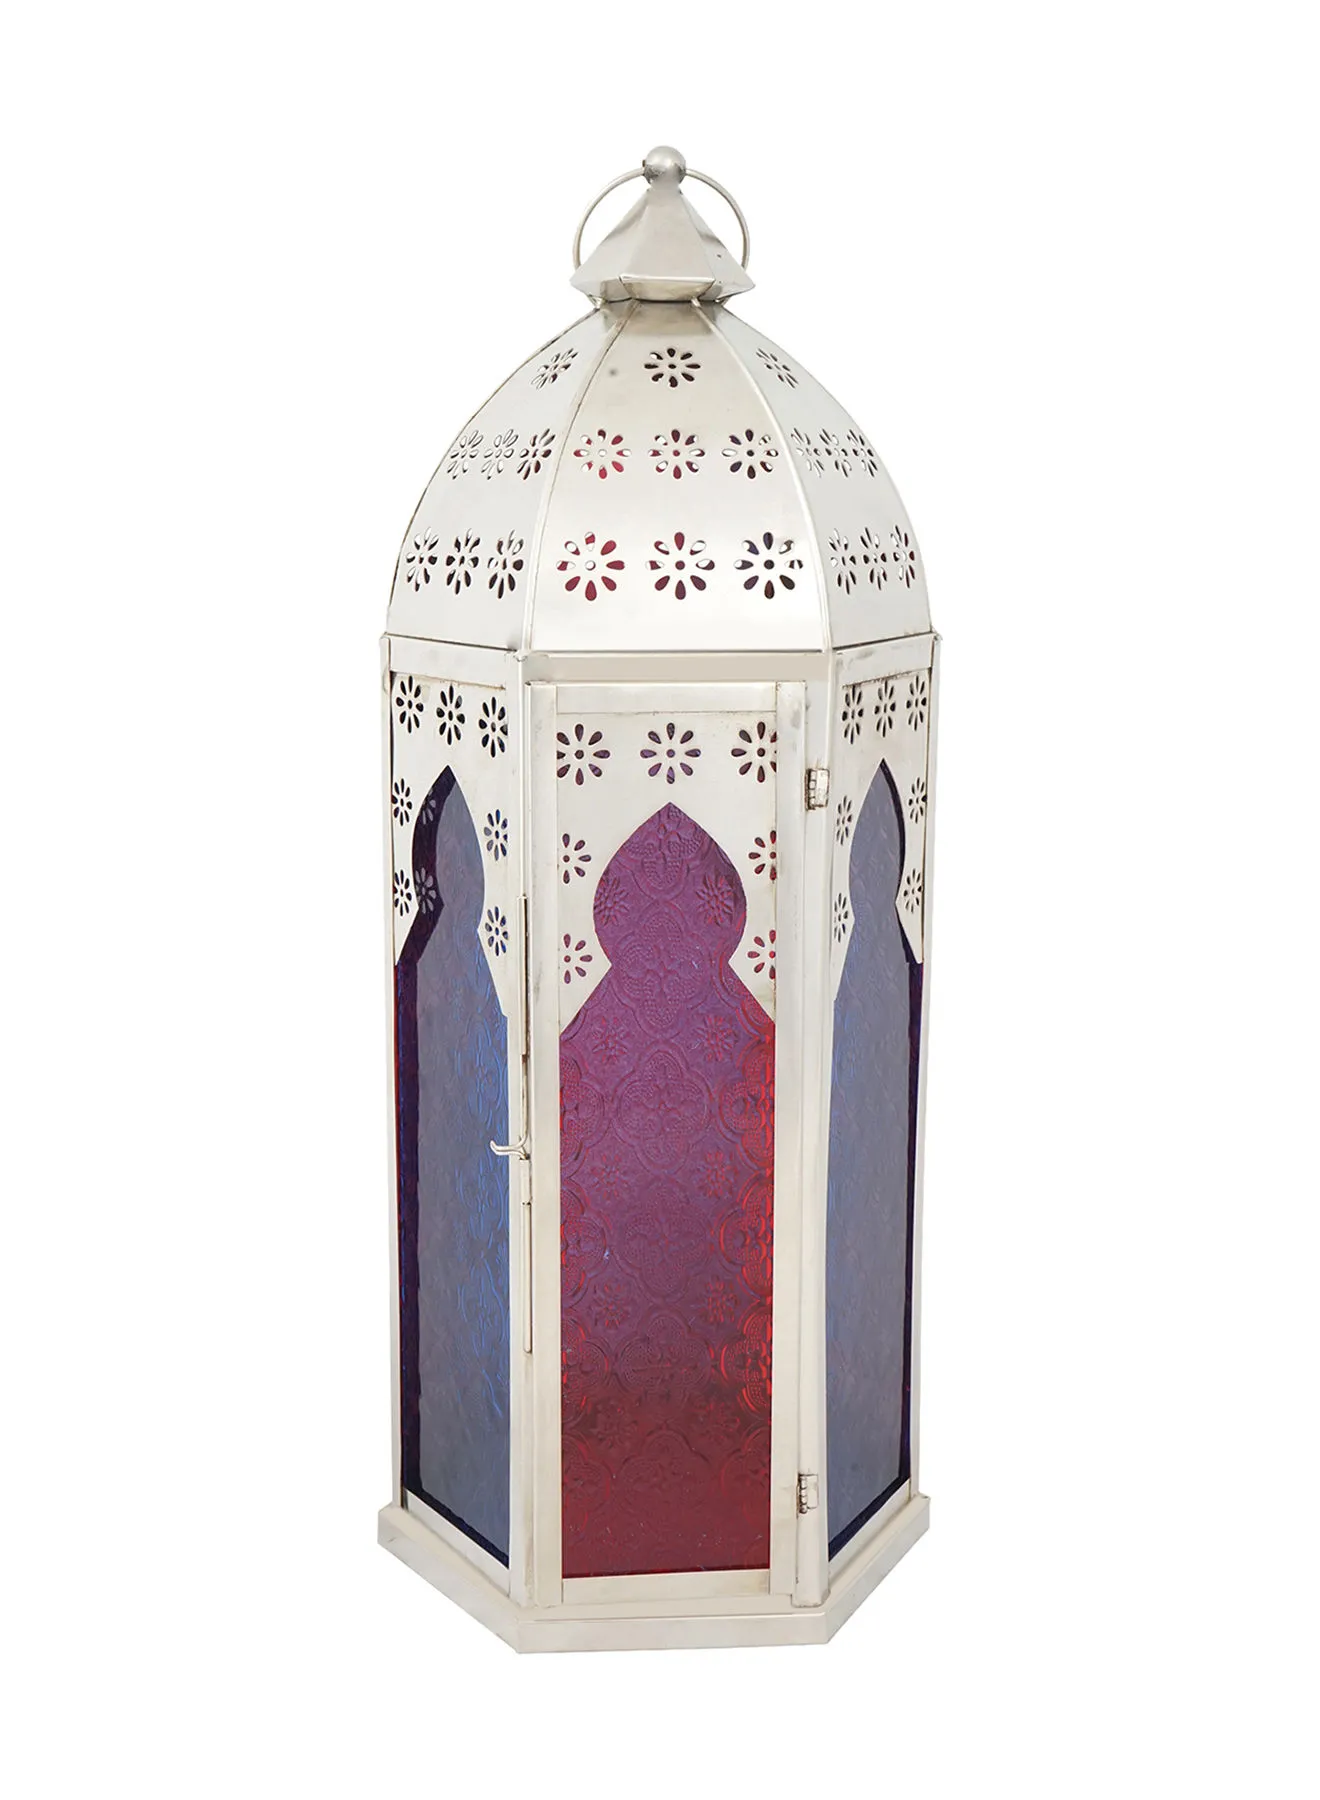 ebb & flow Modern Candle Ramadan Lantern With Glass Unique Luxury Quality Scents For The Perfect Stylish Home Silver 21 x 21 x 54centimeter